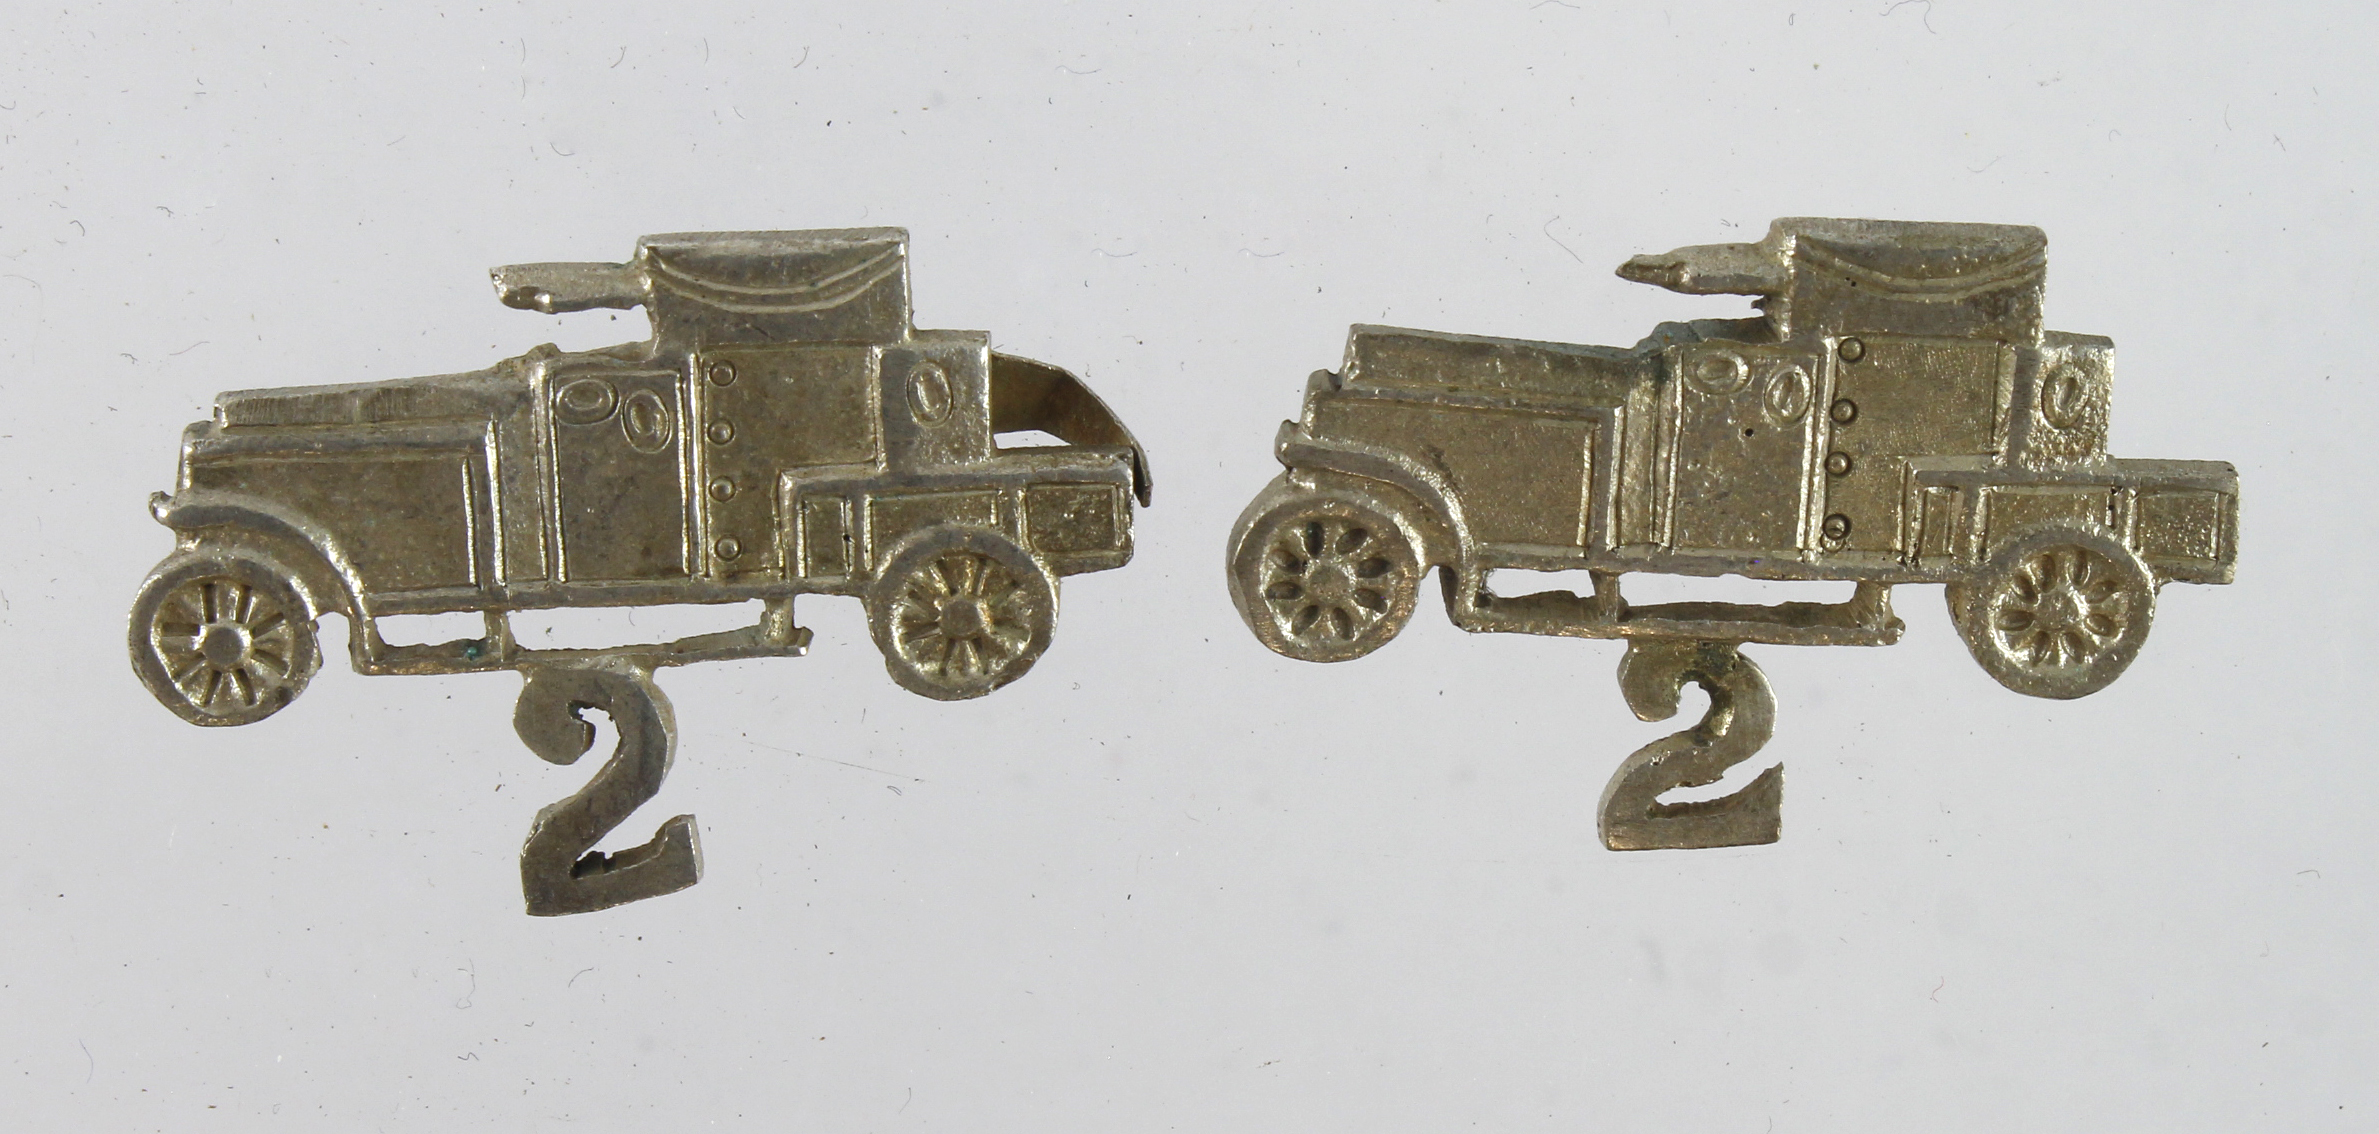 Collar dogs, 2nd light armoured motor car battery, white metal, locally made.